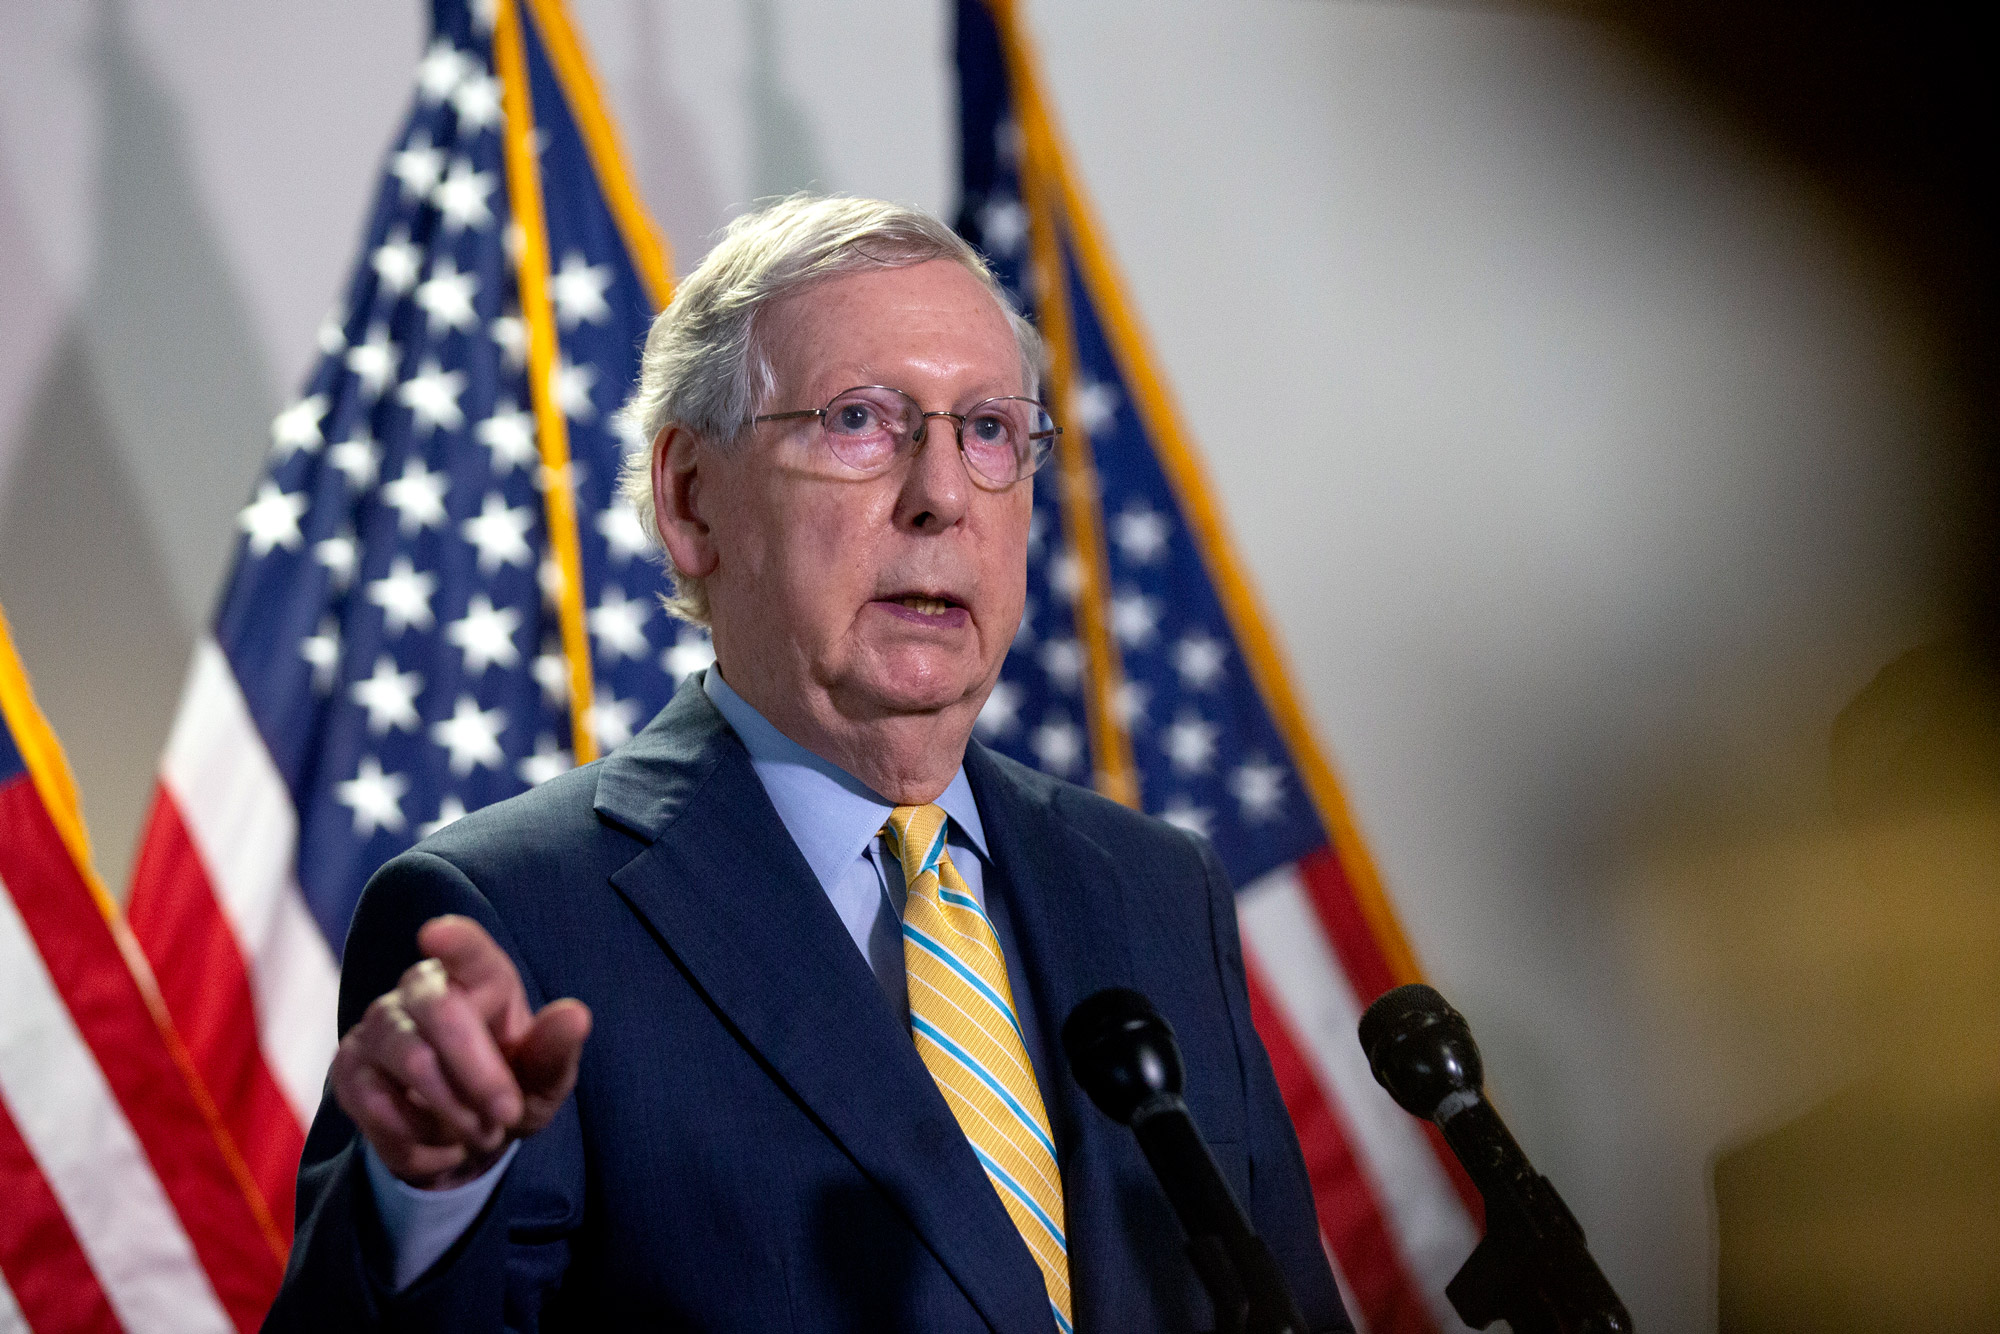 Senate Majority Leader Mitch McConnell speaks during a press conference in the Hart Senate Office Building on June 30 in Washington, DC. 